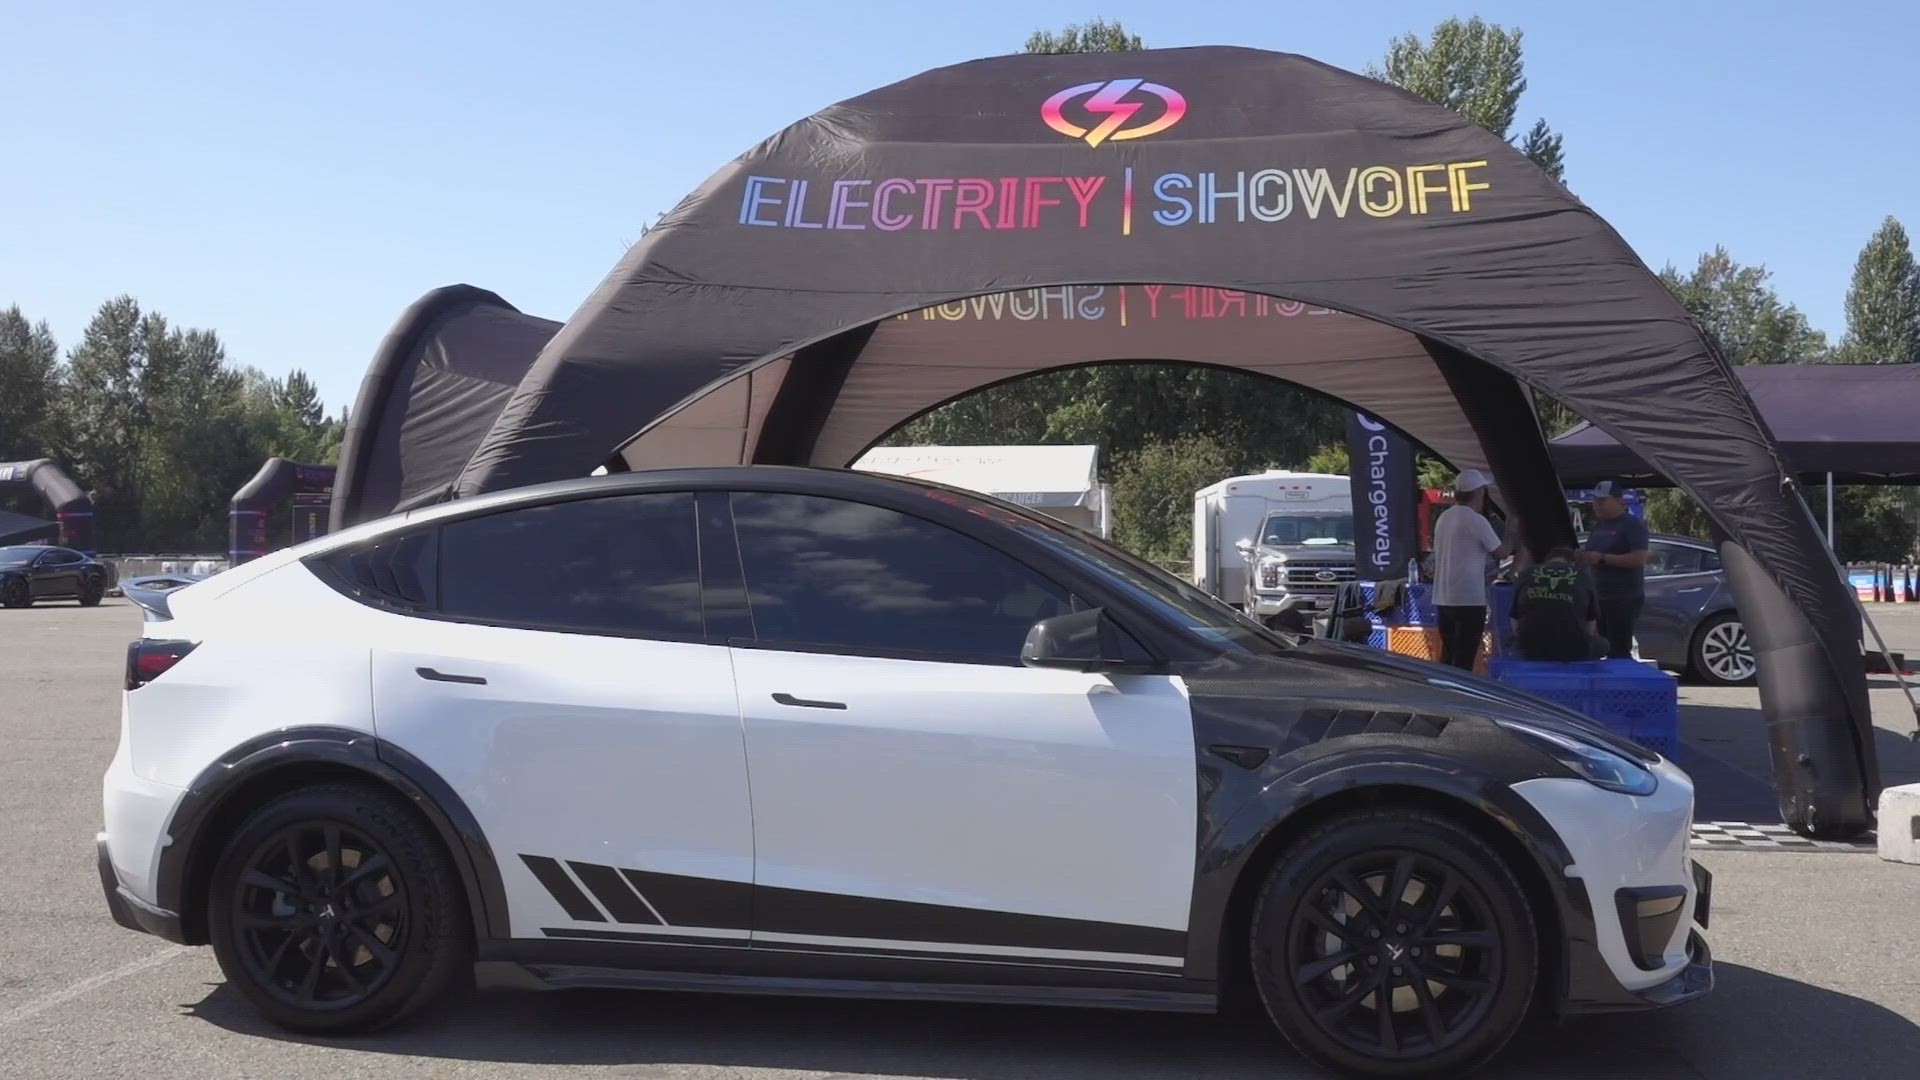 North America’s largest electric vehicle festival is descending upon Marymoor park in Redmond.